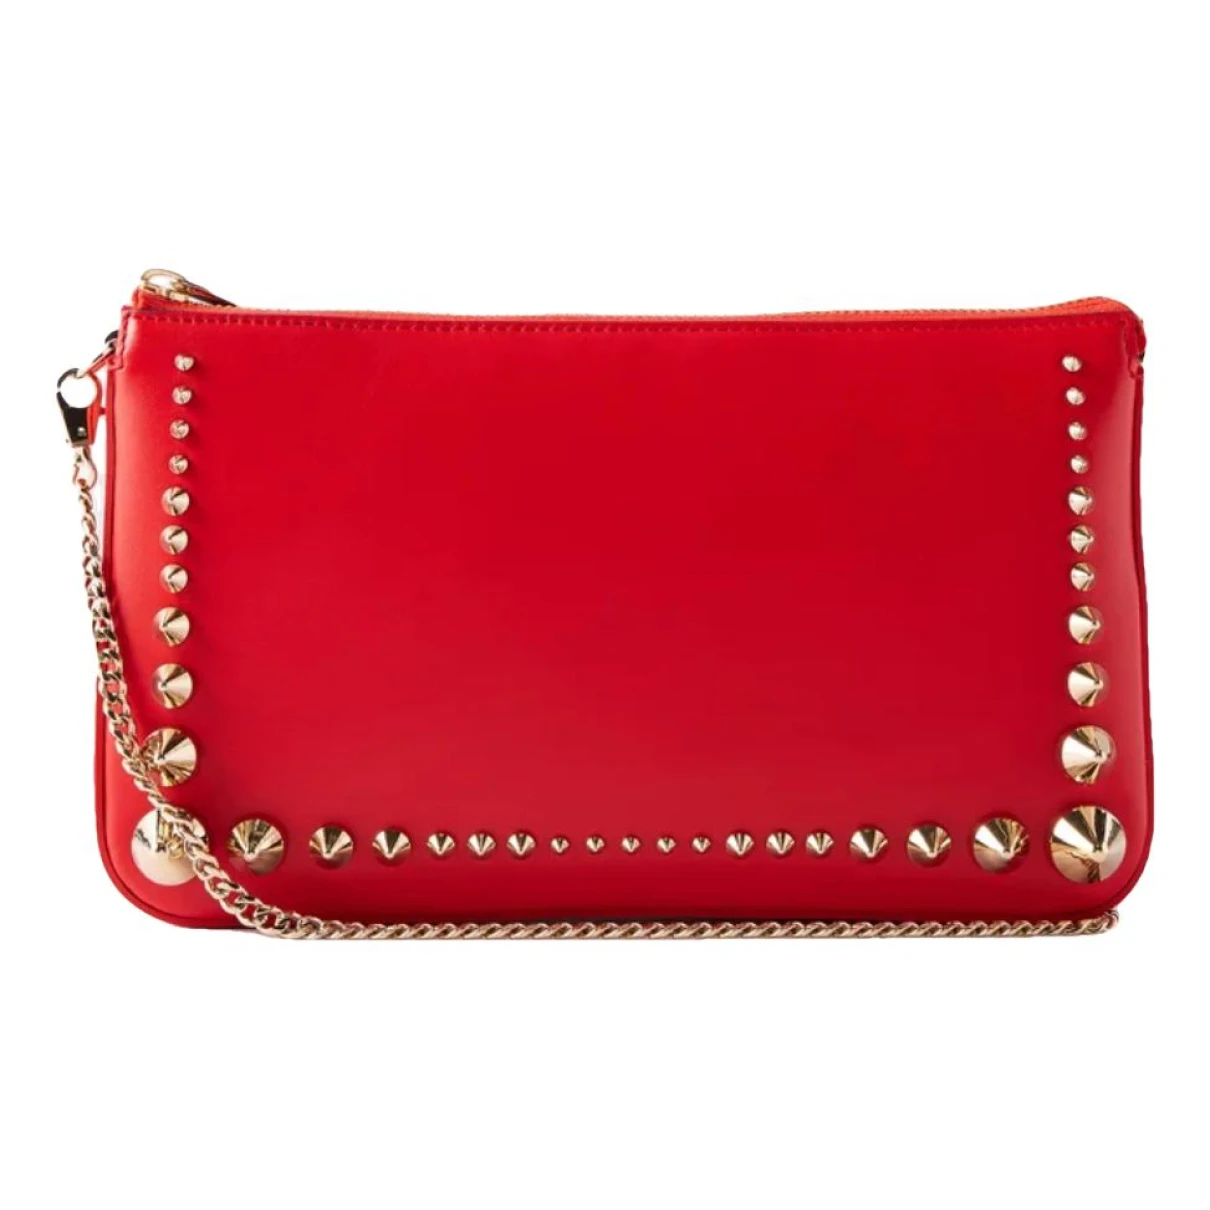 Pre-owned Christian Louboutin Triloubi Leather Handbag In Red